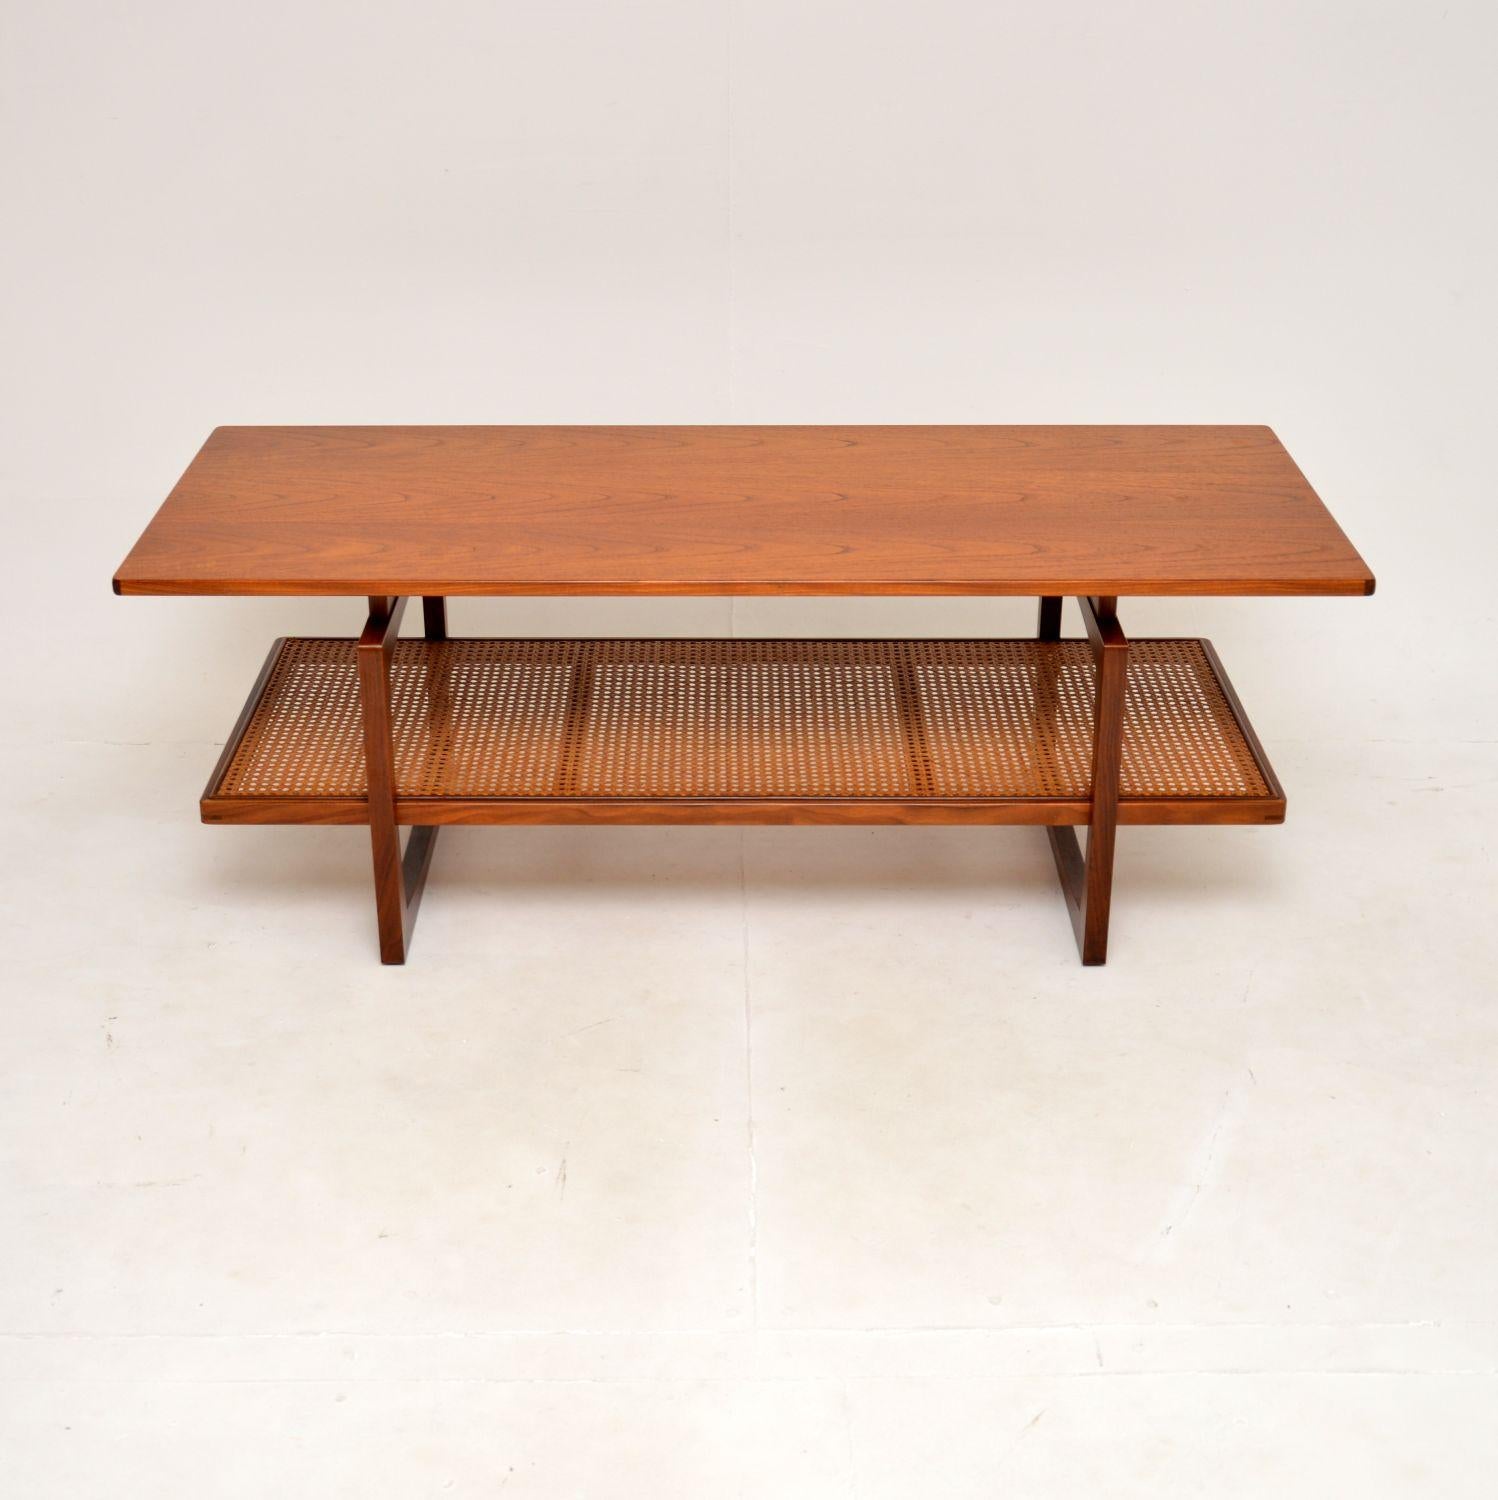 An extremely well made and very rare vintage teak coffee table by G Plan. This was made in England in the 1960’s as part of the Quadrille range.

This version is rarely seen, it is very large and has a stylish lower rattan covered tier. The quality